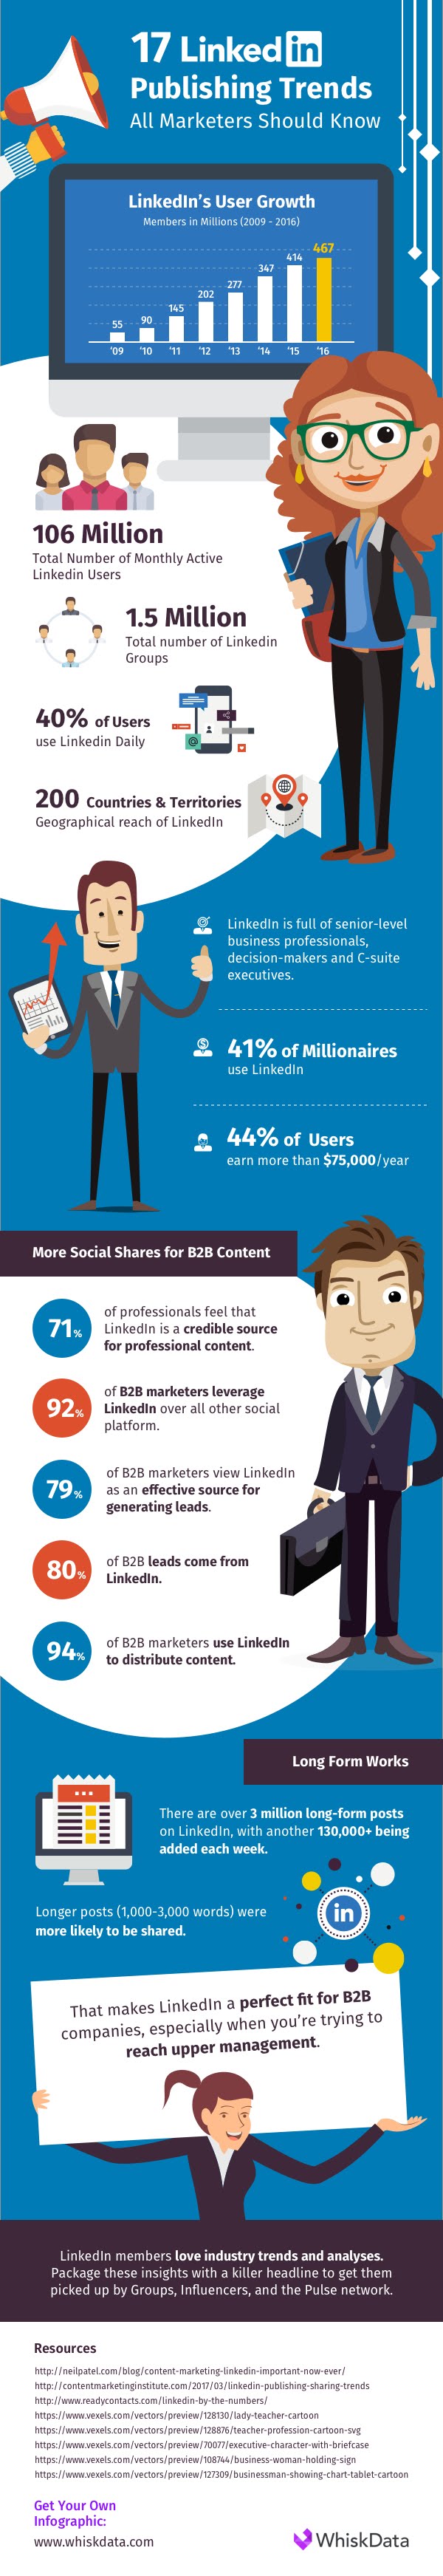 17 LinkedIn Publishing Trends All Marketers Should Know - #Infographic